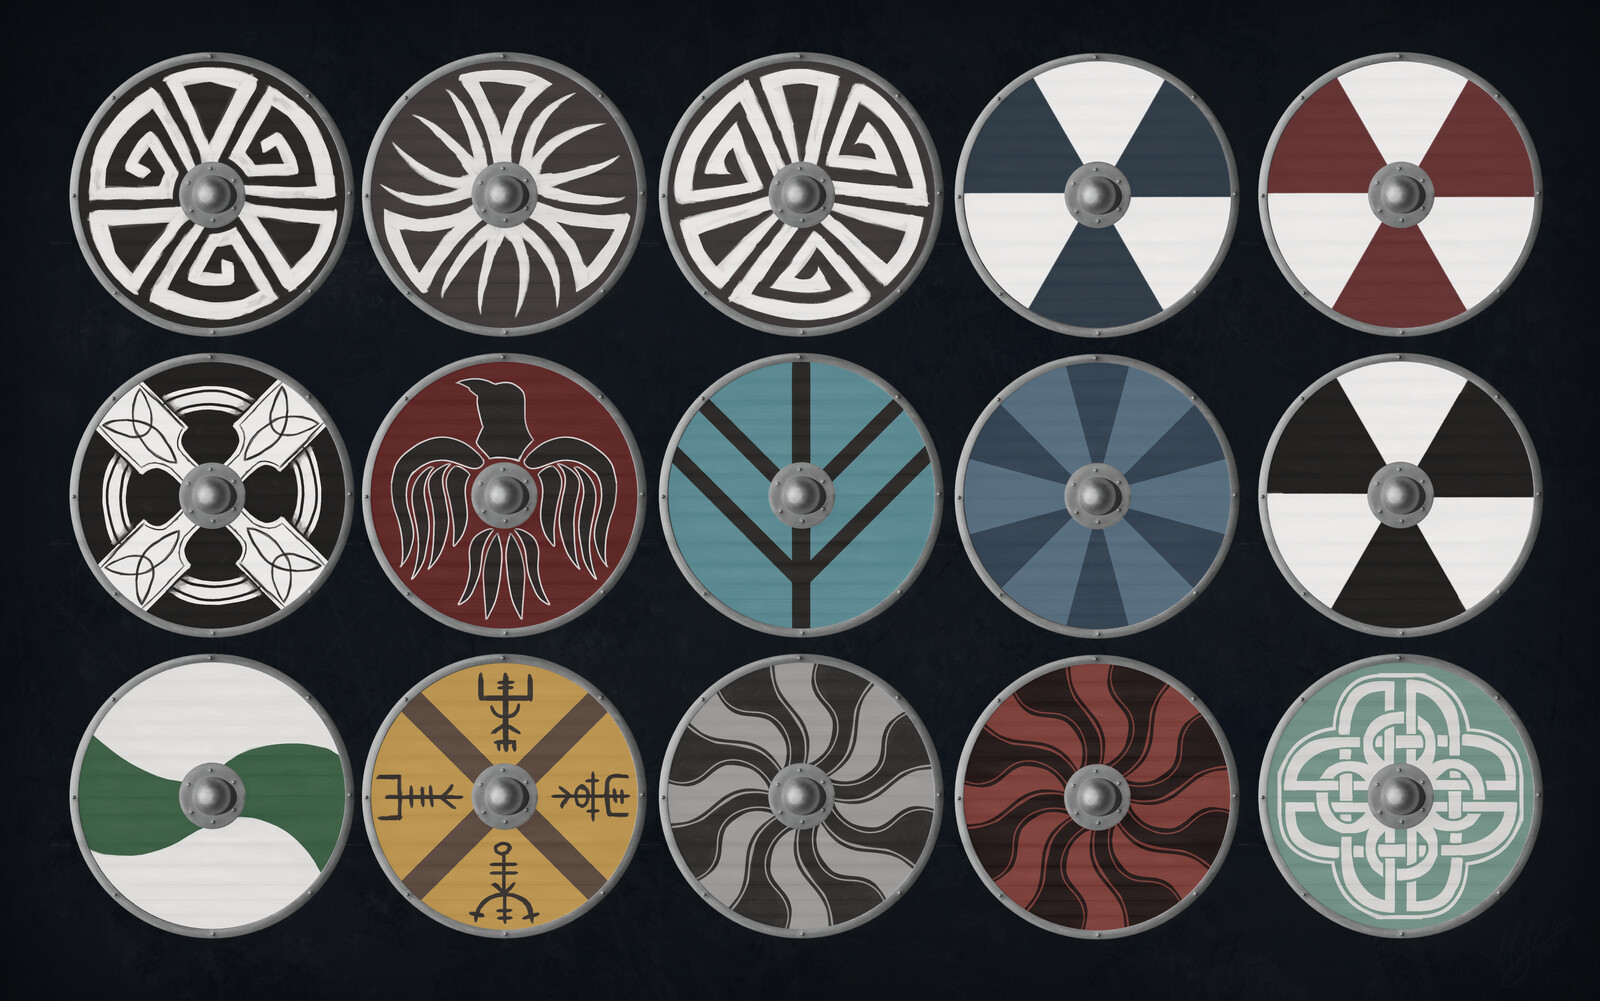 Shield Concepts, used only 5 of these.
3,6,7,12,15 with 2 more color variants of 15 and 3 and a modification of 4.